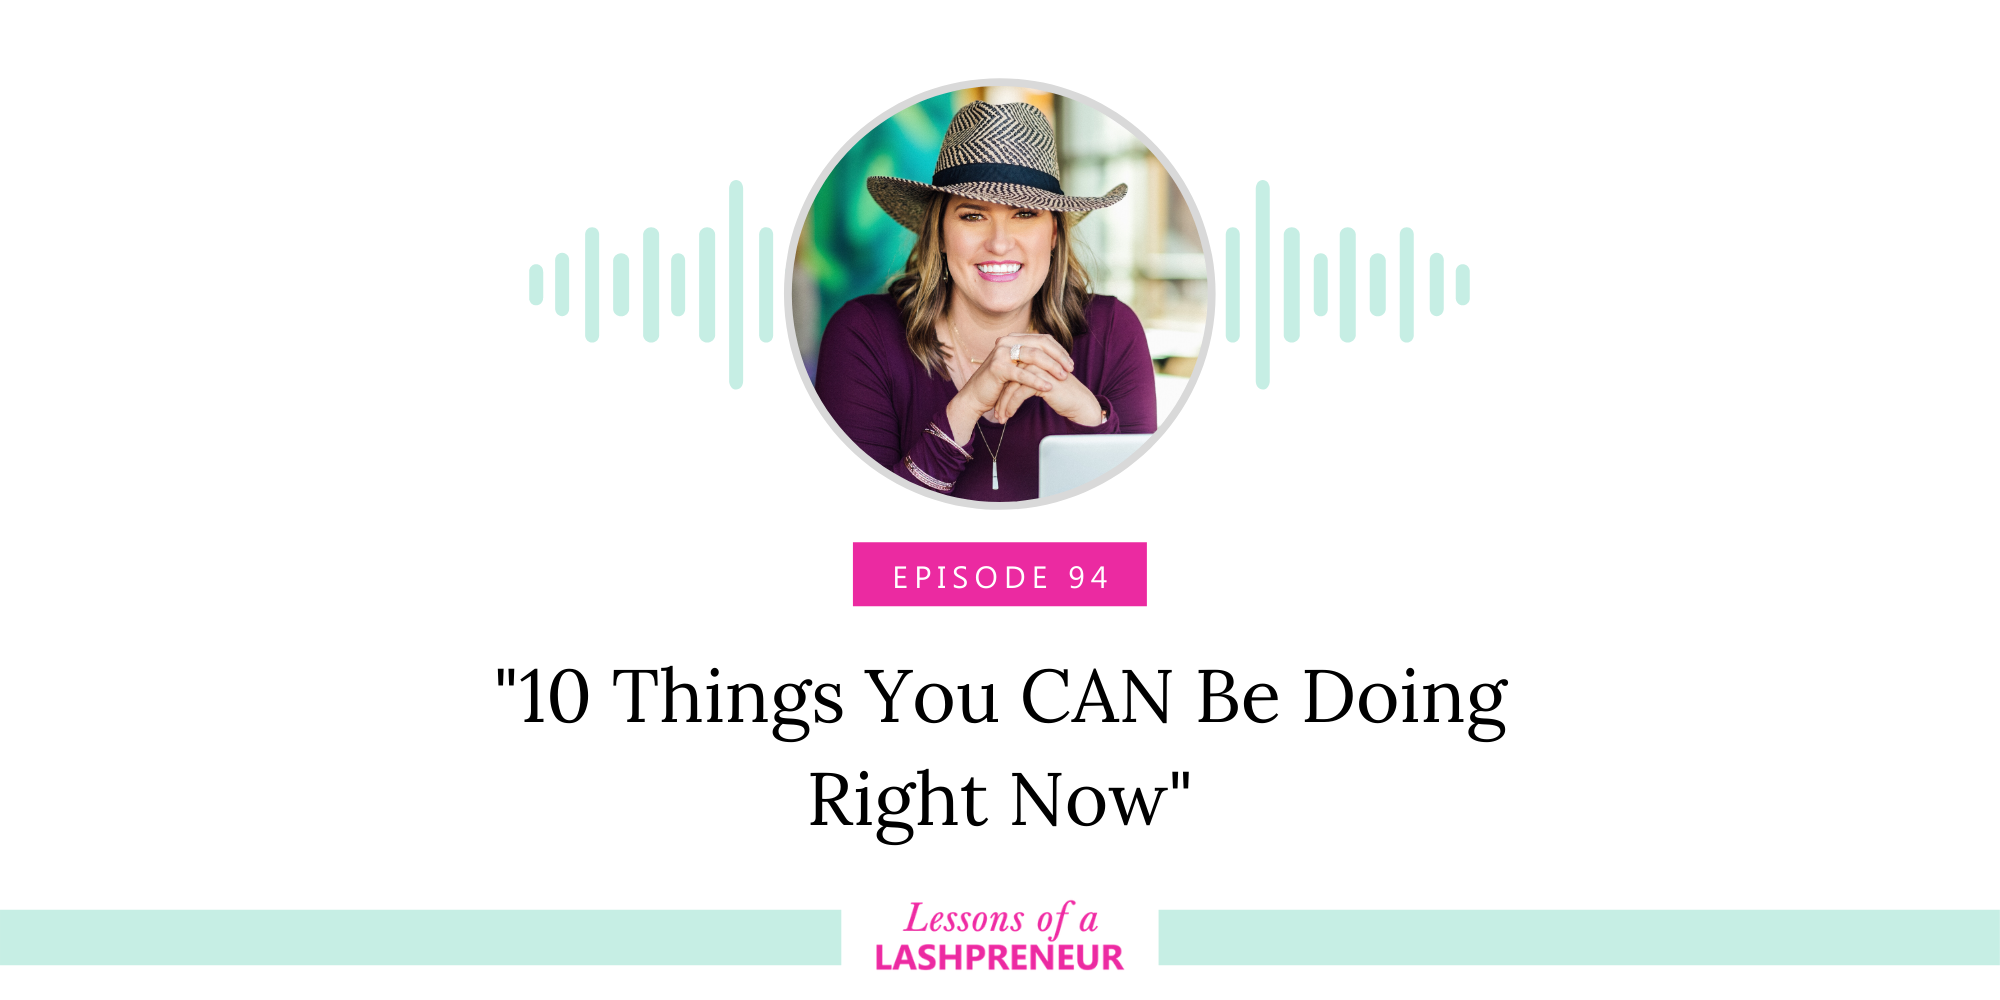 Top 10 Things You CAN Be Doing